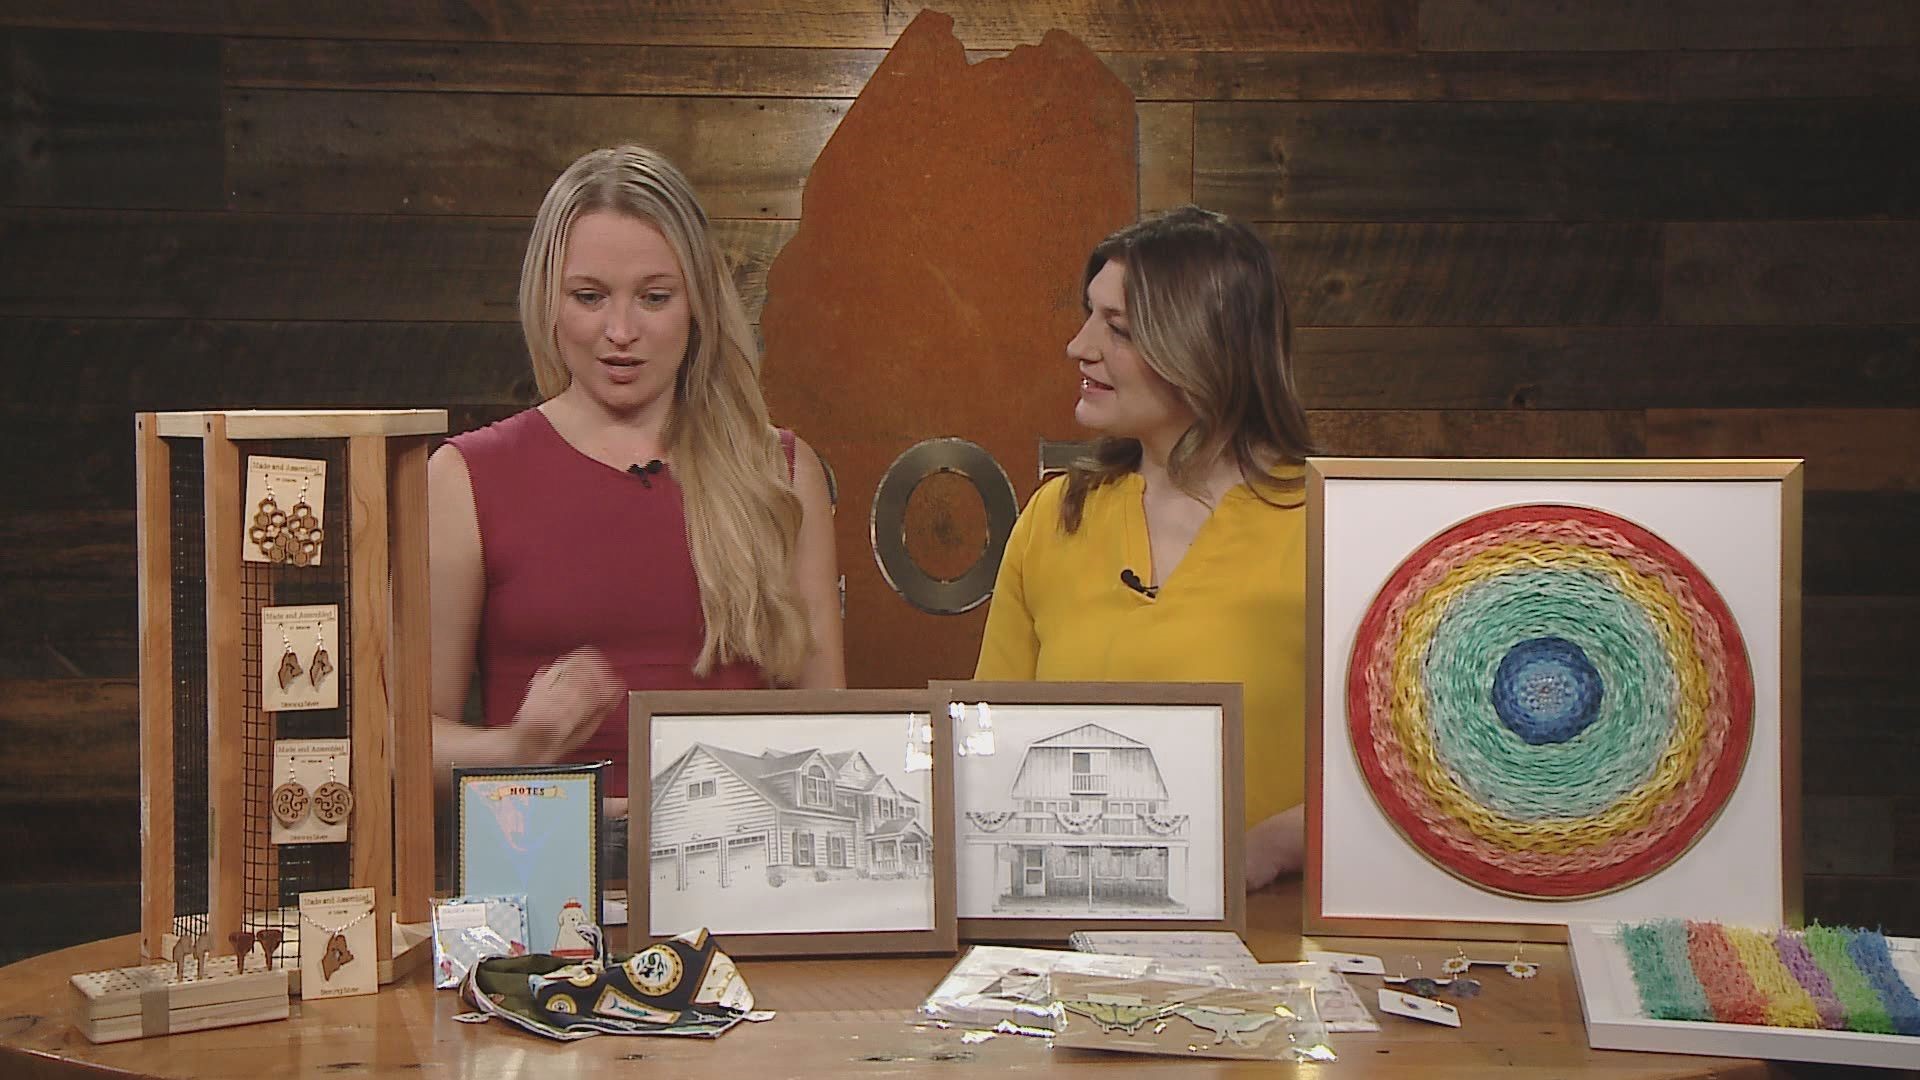 Kristan Vermeulen stopped by the 207 studio with a tabletop full of products made in Maine.